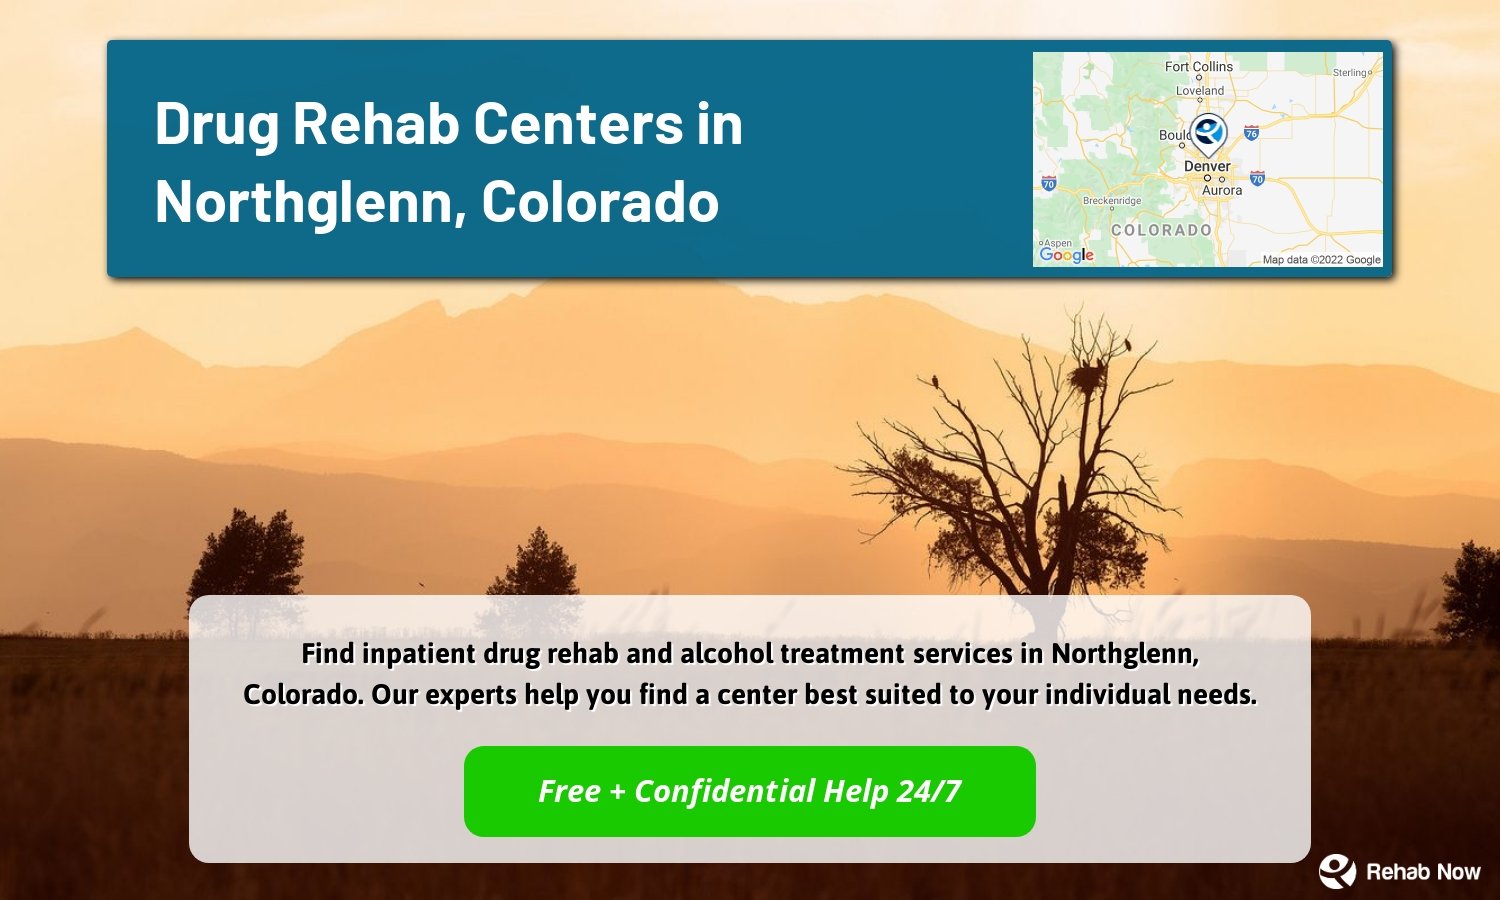 Find inpatient drug rehab and alcohol treatment services in Northglenn, Colorado. Our experts help you find a center best suited to your individual needs.